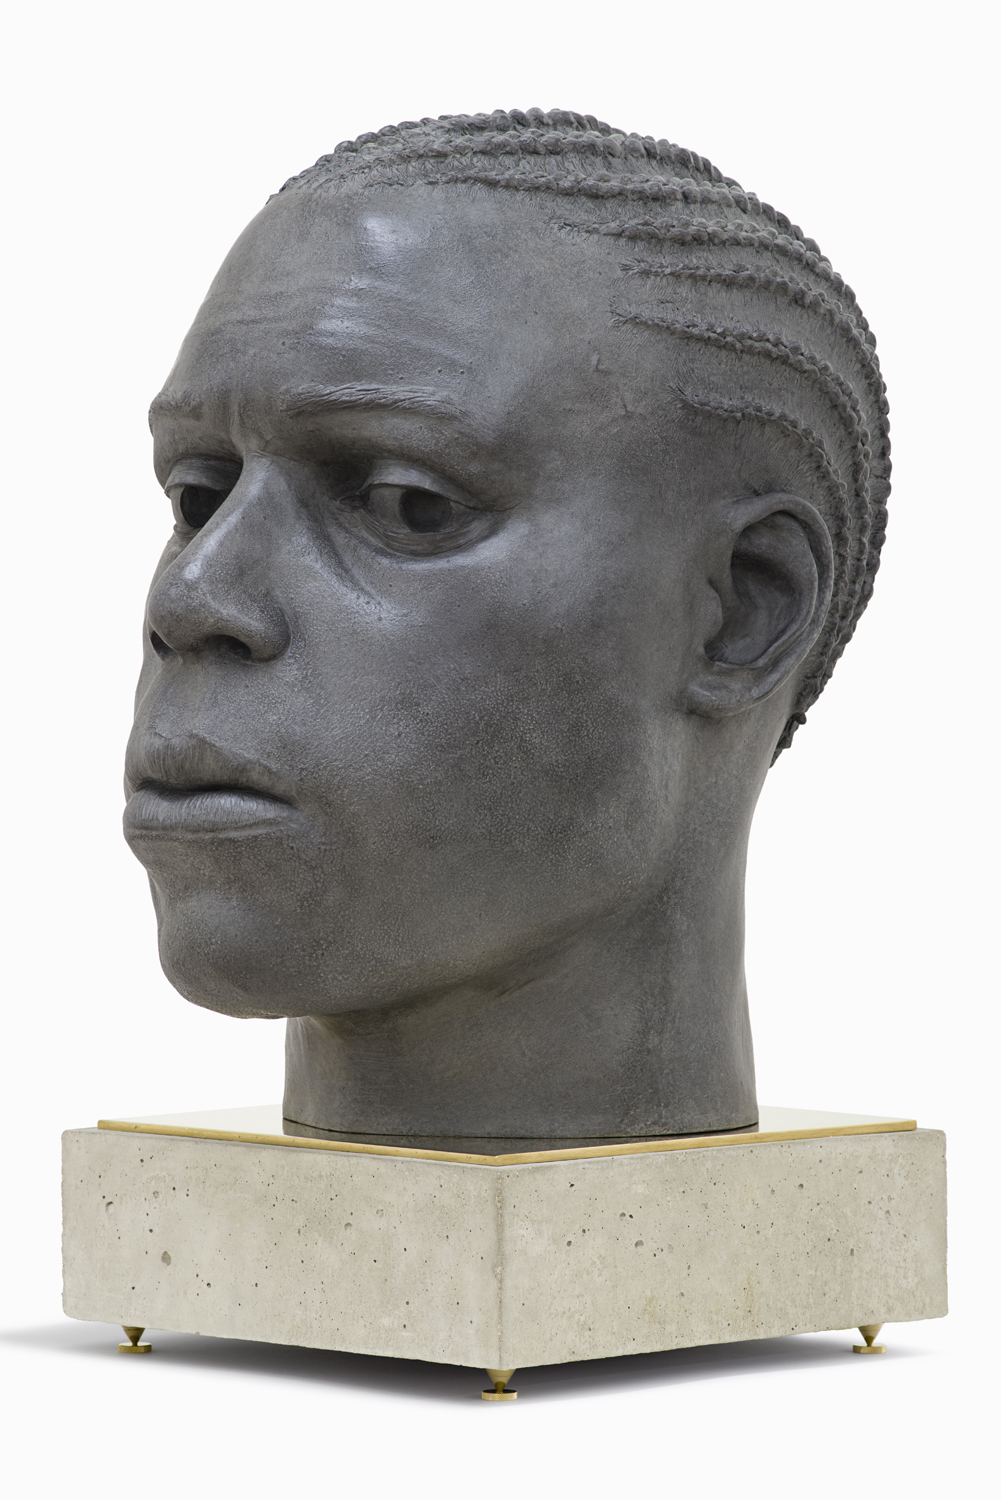 Tom Price, Base - Head (Surface Tension), 2014, bronze, brass and concrete, 77 x 45 x 60 cm [65 x 45 x 60 cm head, 12 x 40 x 40 cm base] [45].jpg